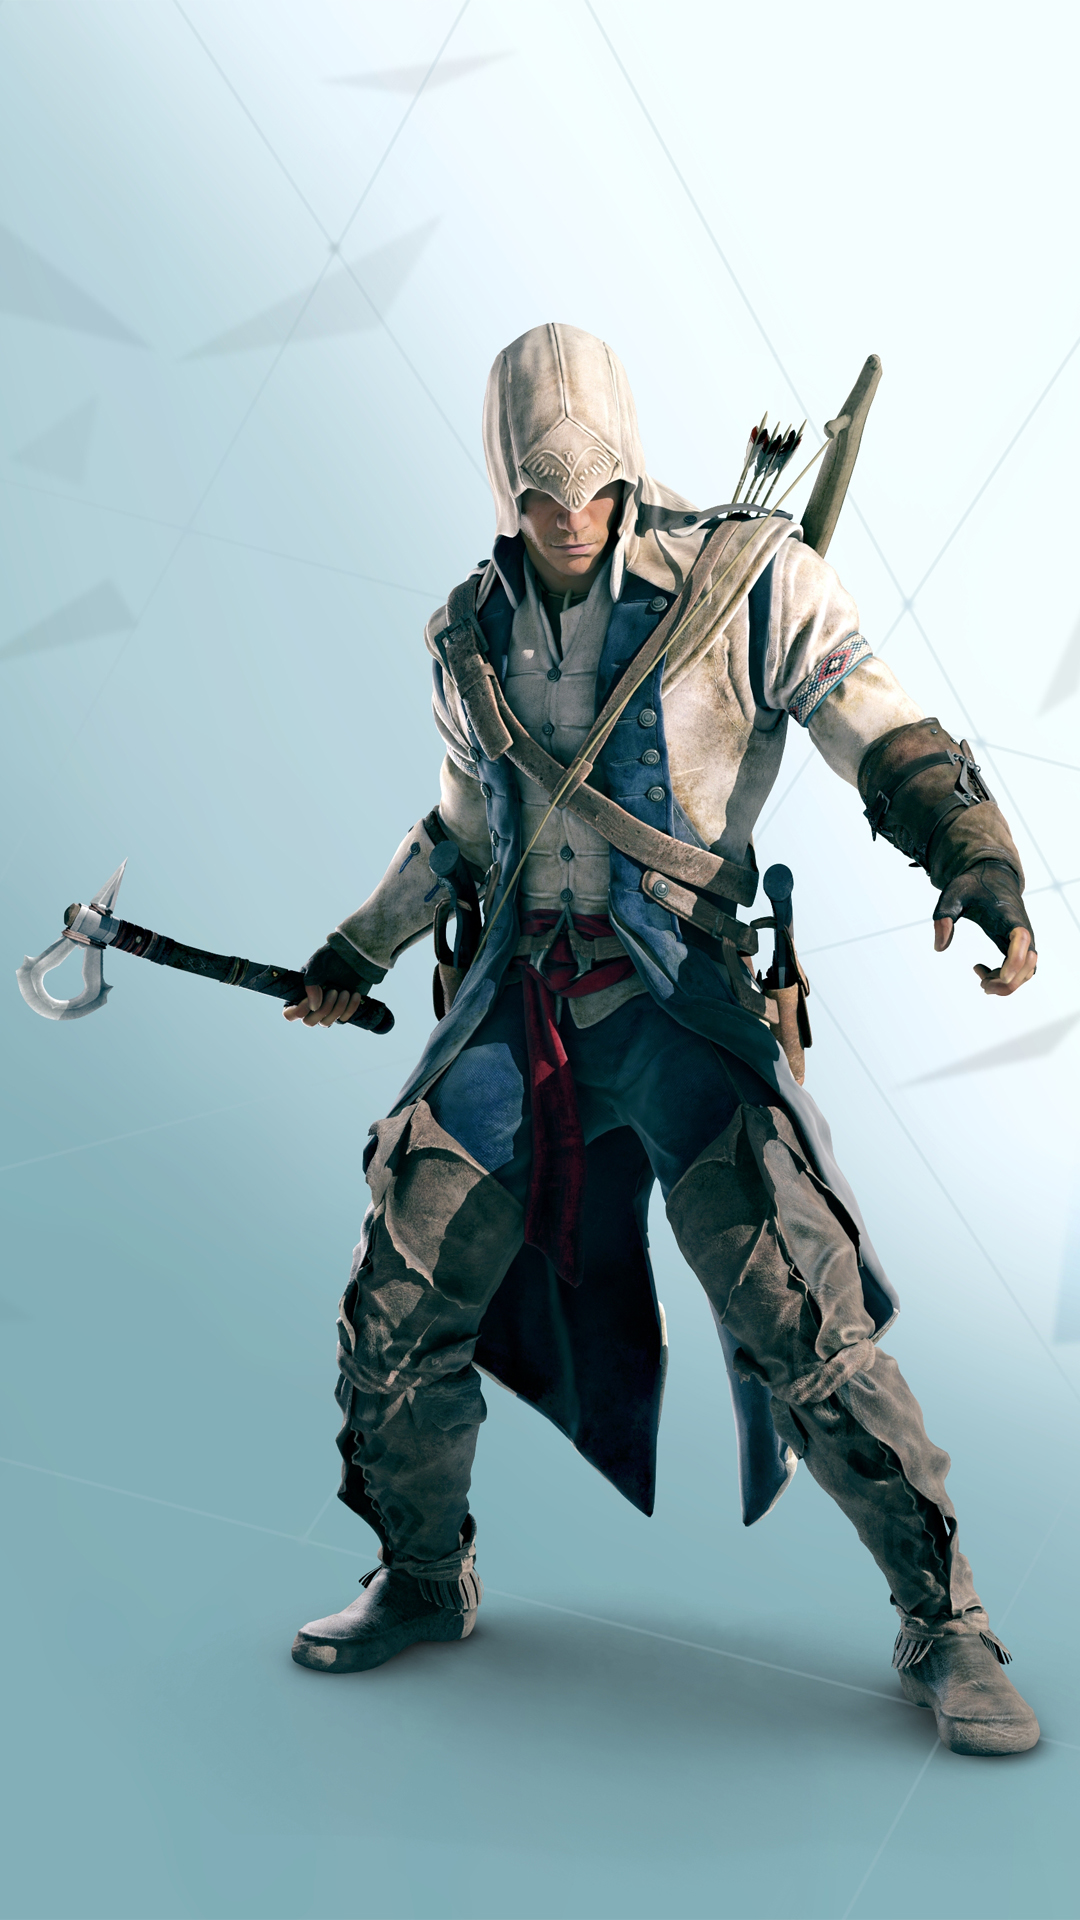 Assassins Creed 3 Htc One Wallpaper - Assassin's Creed 3 Character - HD Wallpaper 